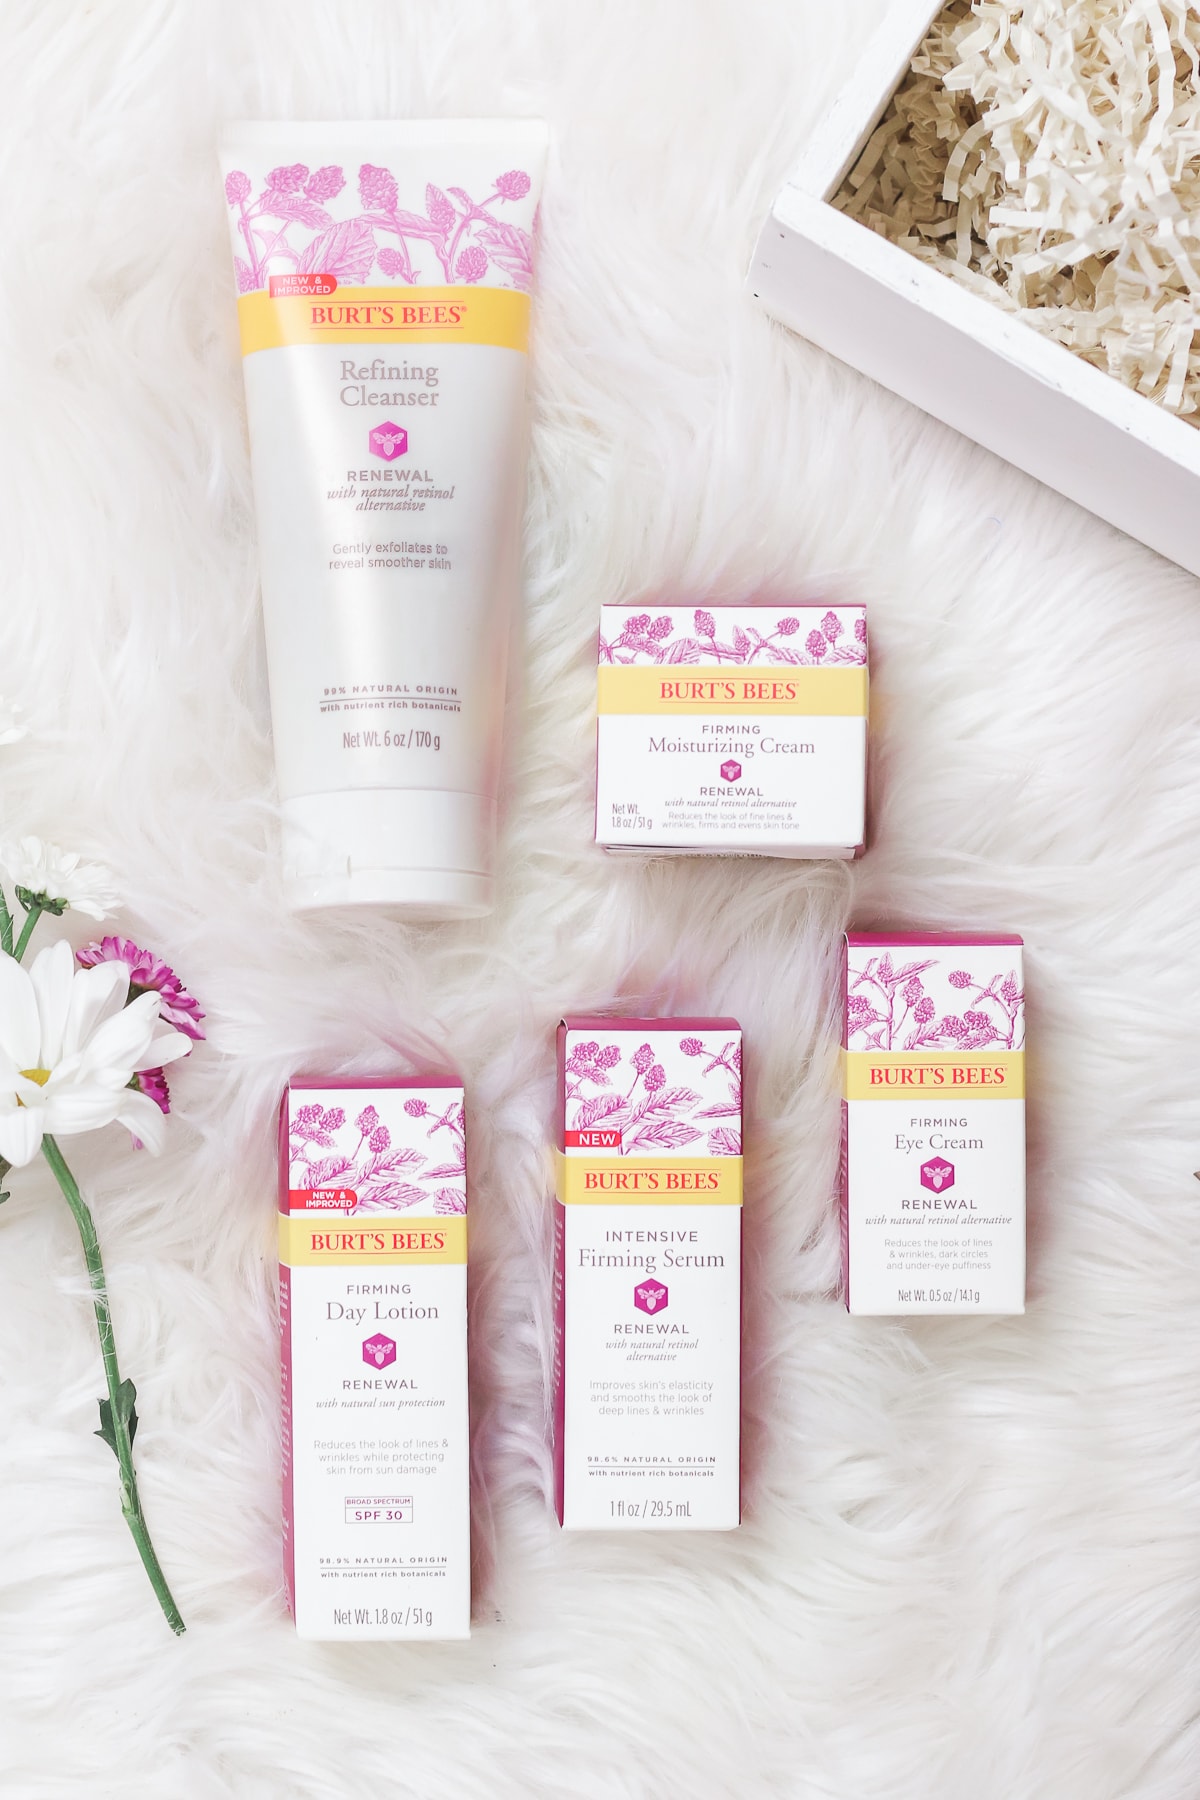 Beauty blogger Stephanie Ziajka shares a Burt's Bees Renewal skincare review on Diary of a Debutante